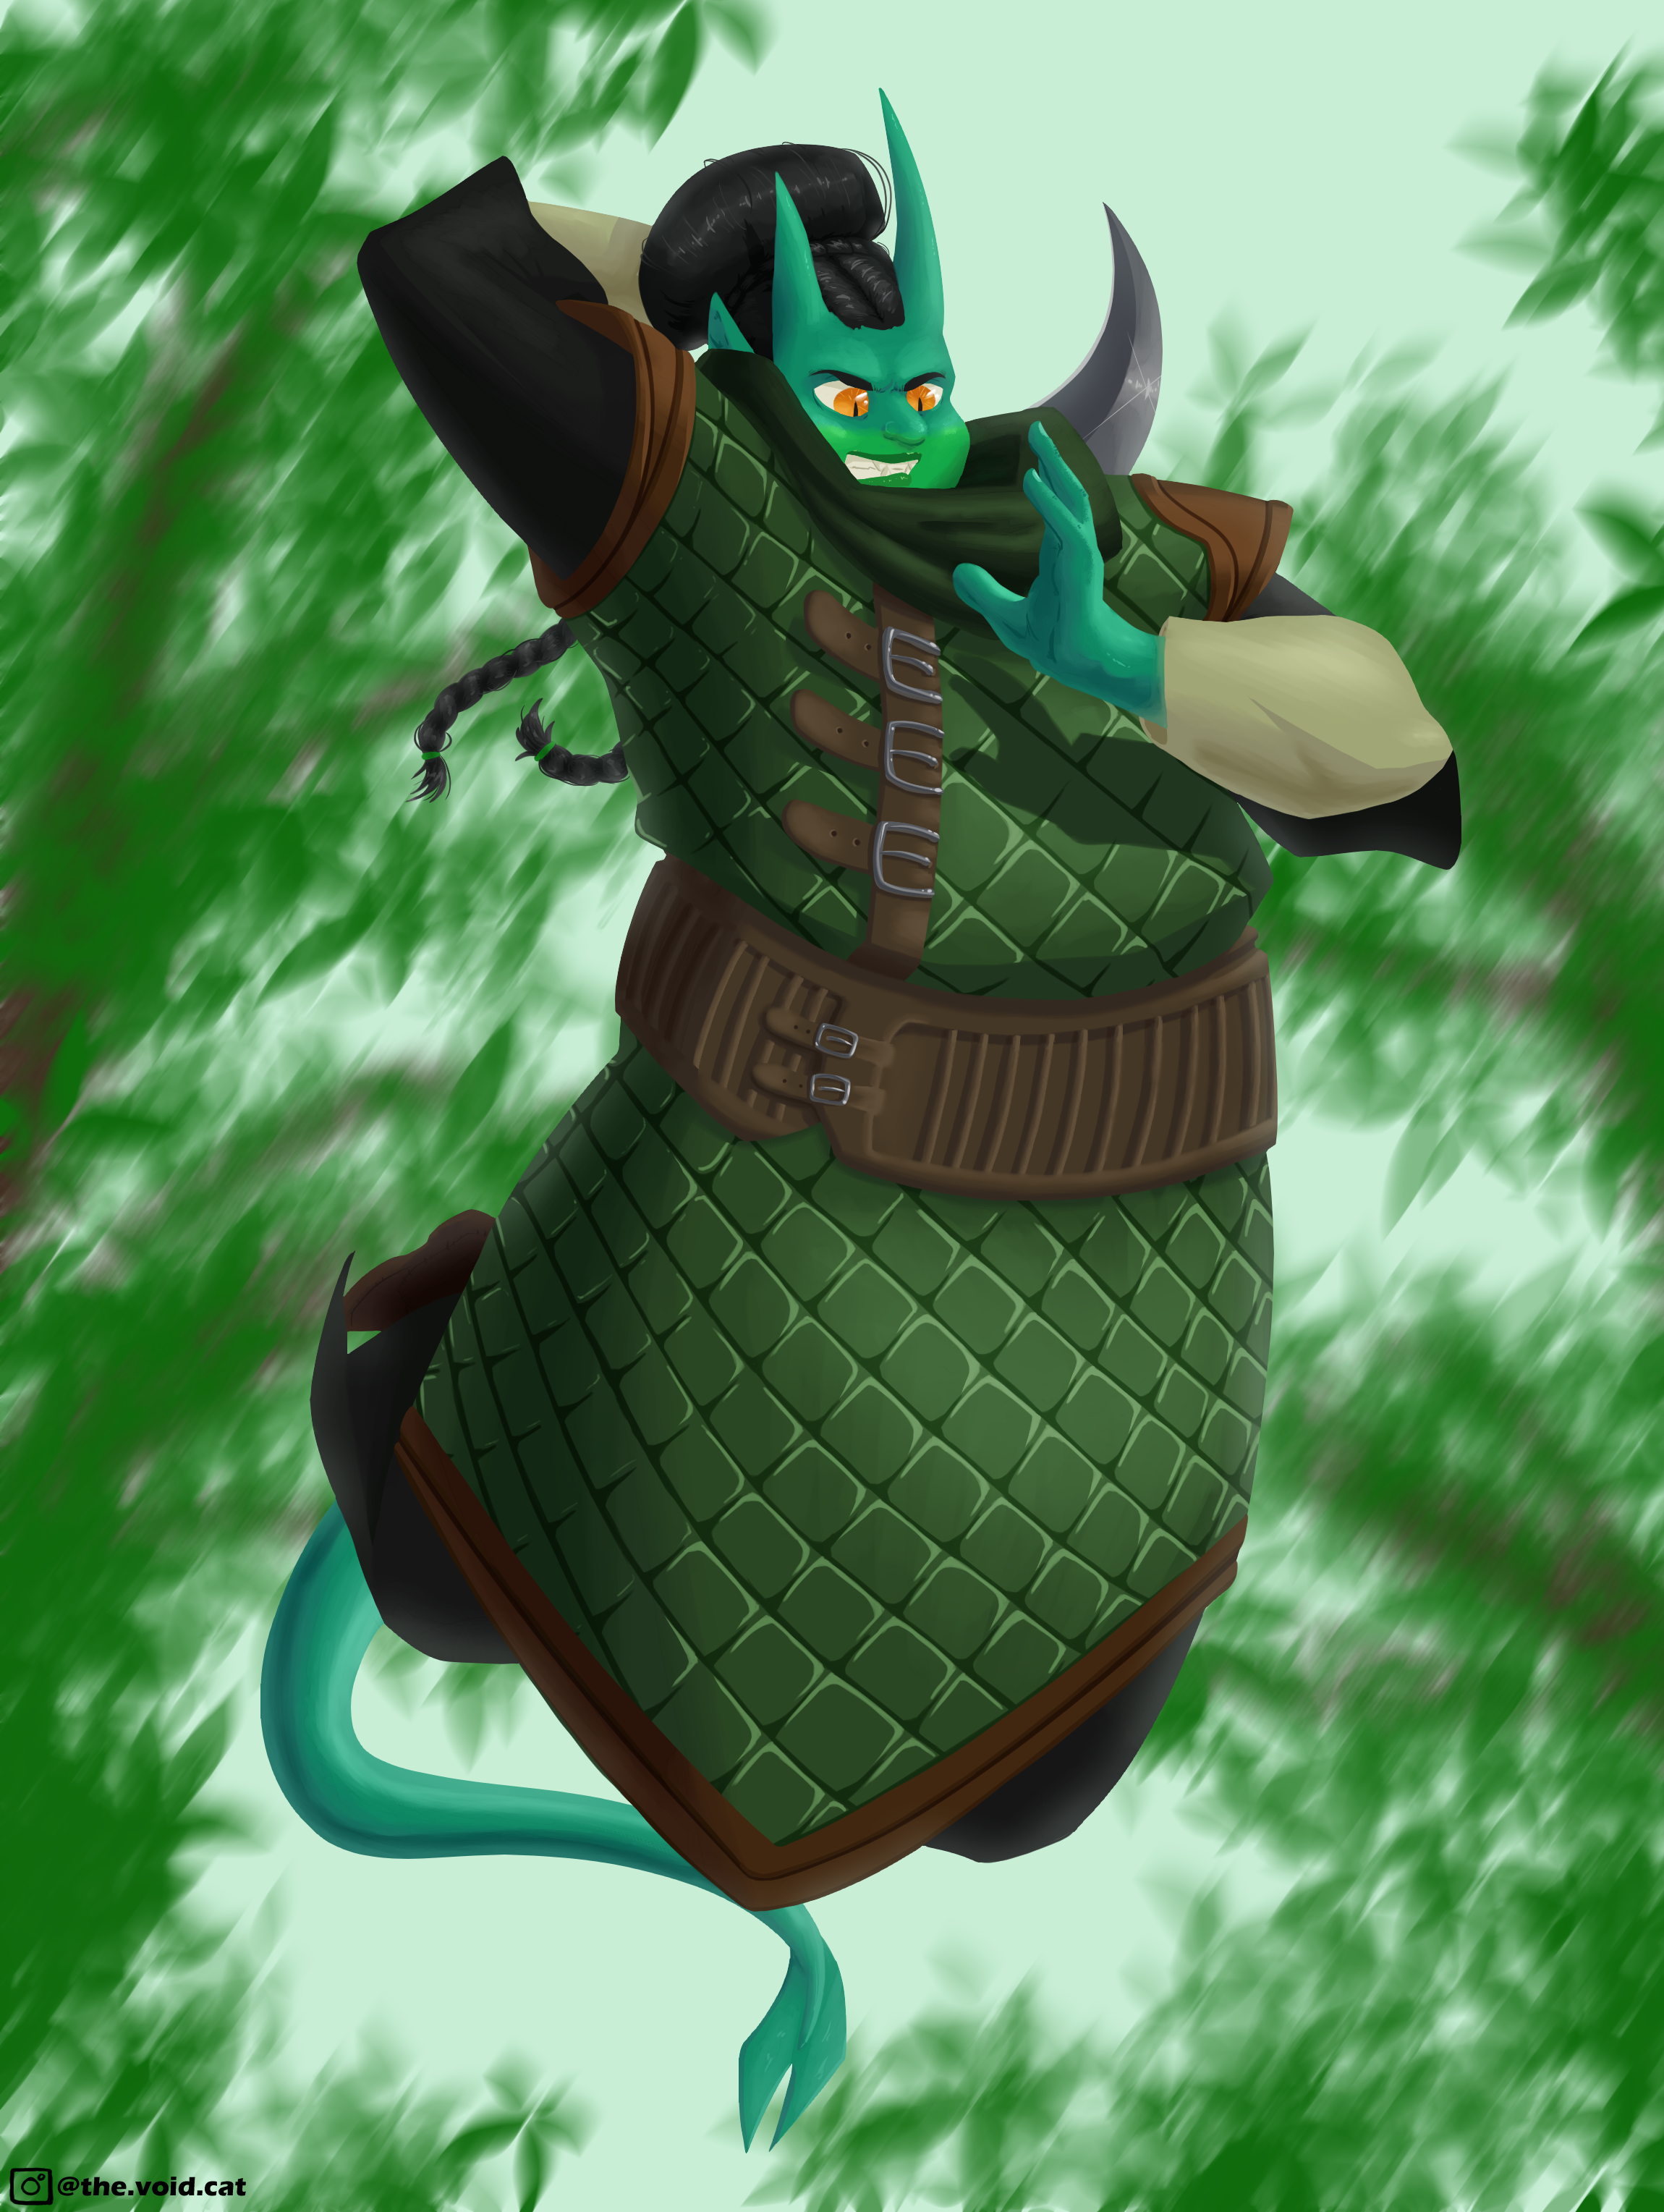 A painting of Diligence, a green tiefling (demon person) with asymmetrical horns, leaping through the air and brandishing a sickle. She has black hair tied into a bun with braids and orange eyes. She's wearing a knee-length green gambeson with a thick leather belt tied around it at the waist.